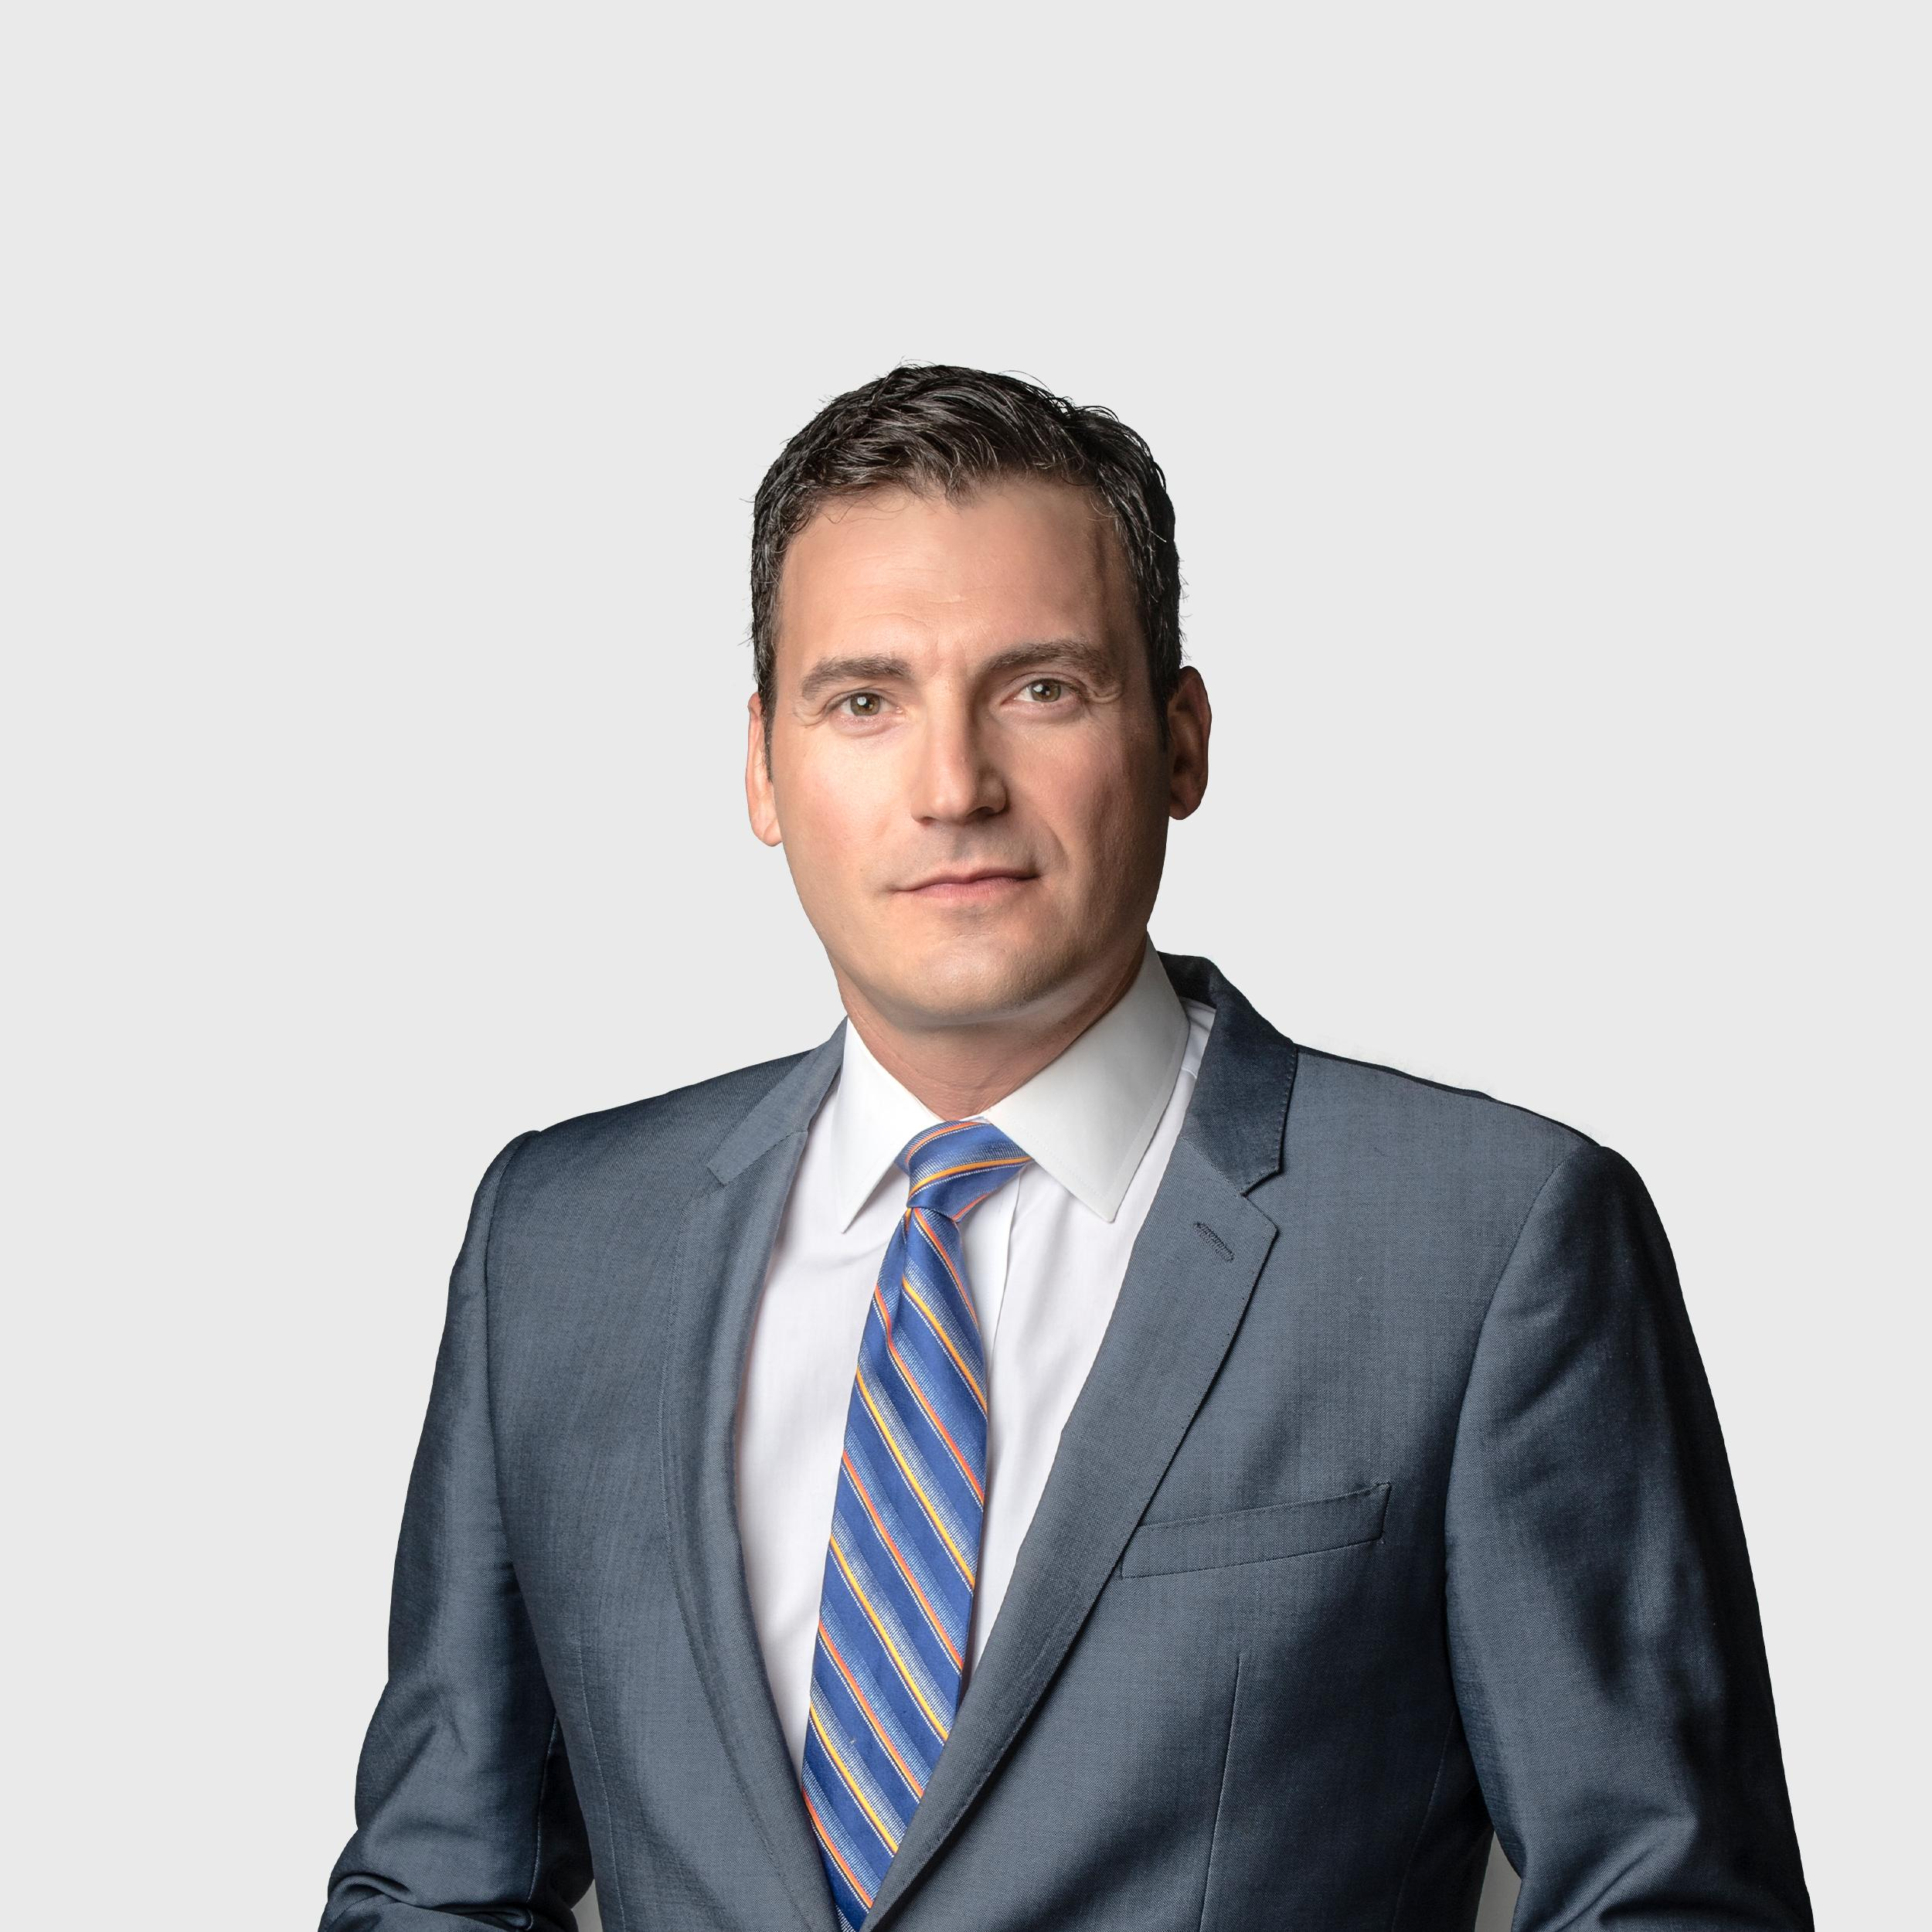 Hour 1 of The Evan Solomon Show for Thurs. August 6th, 2020